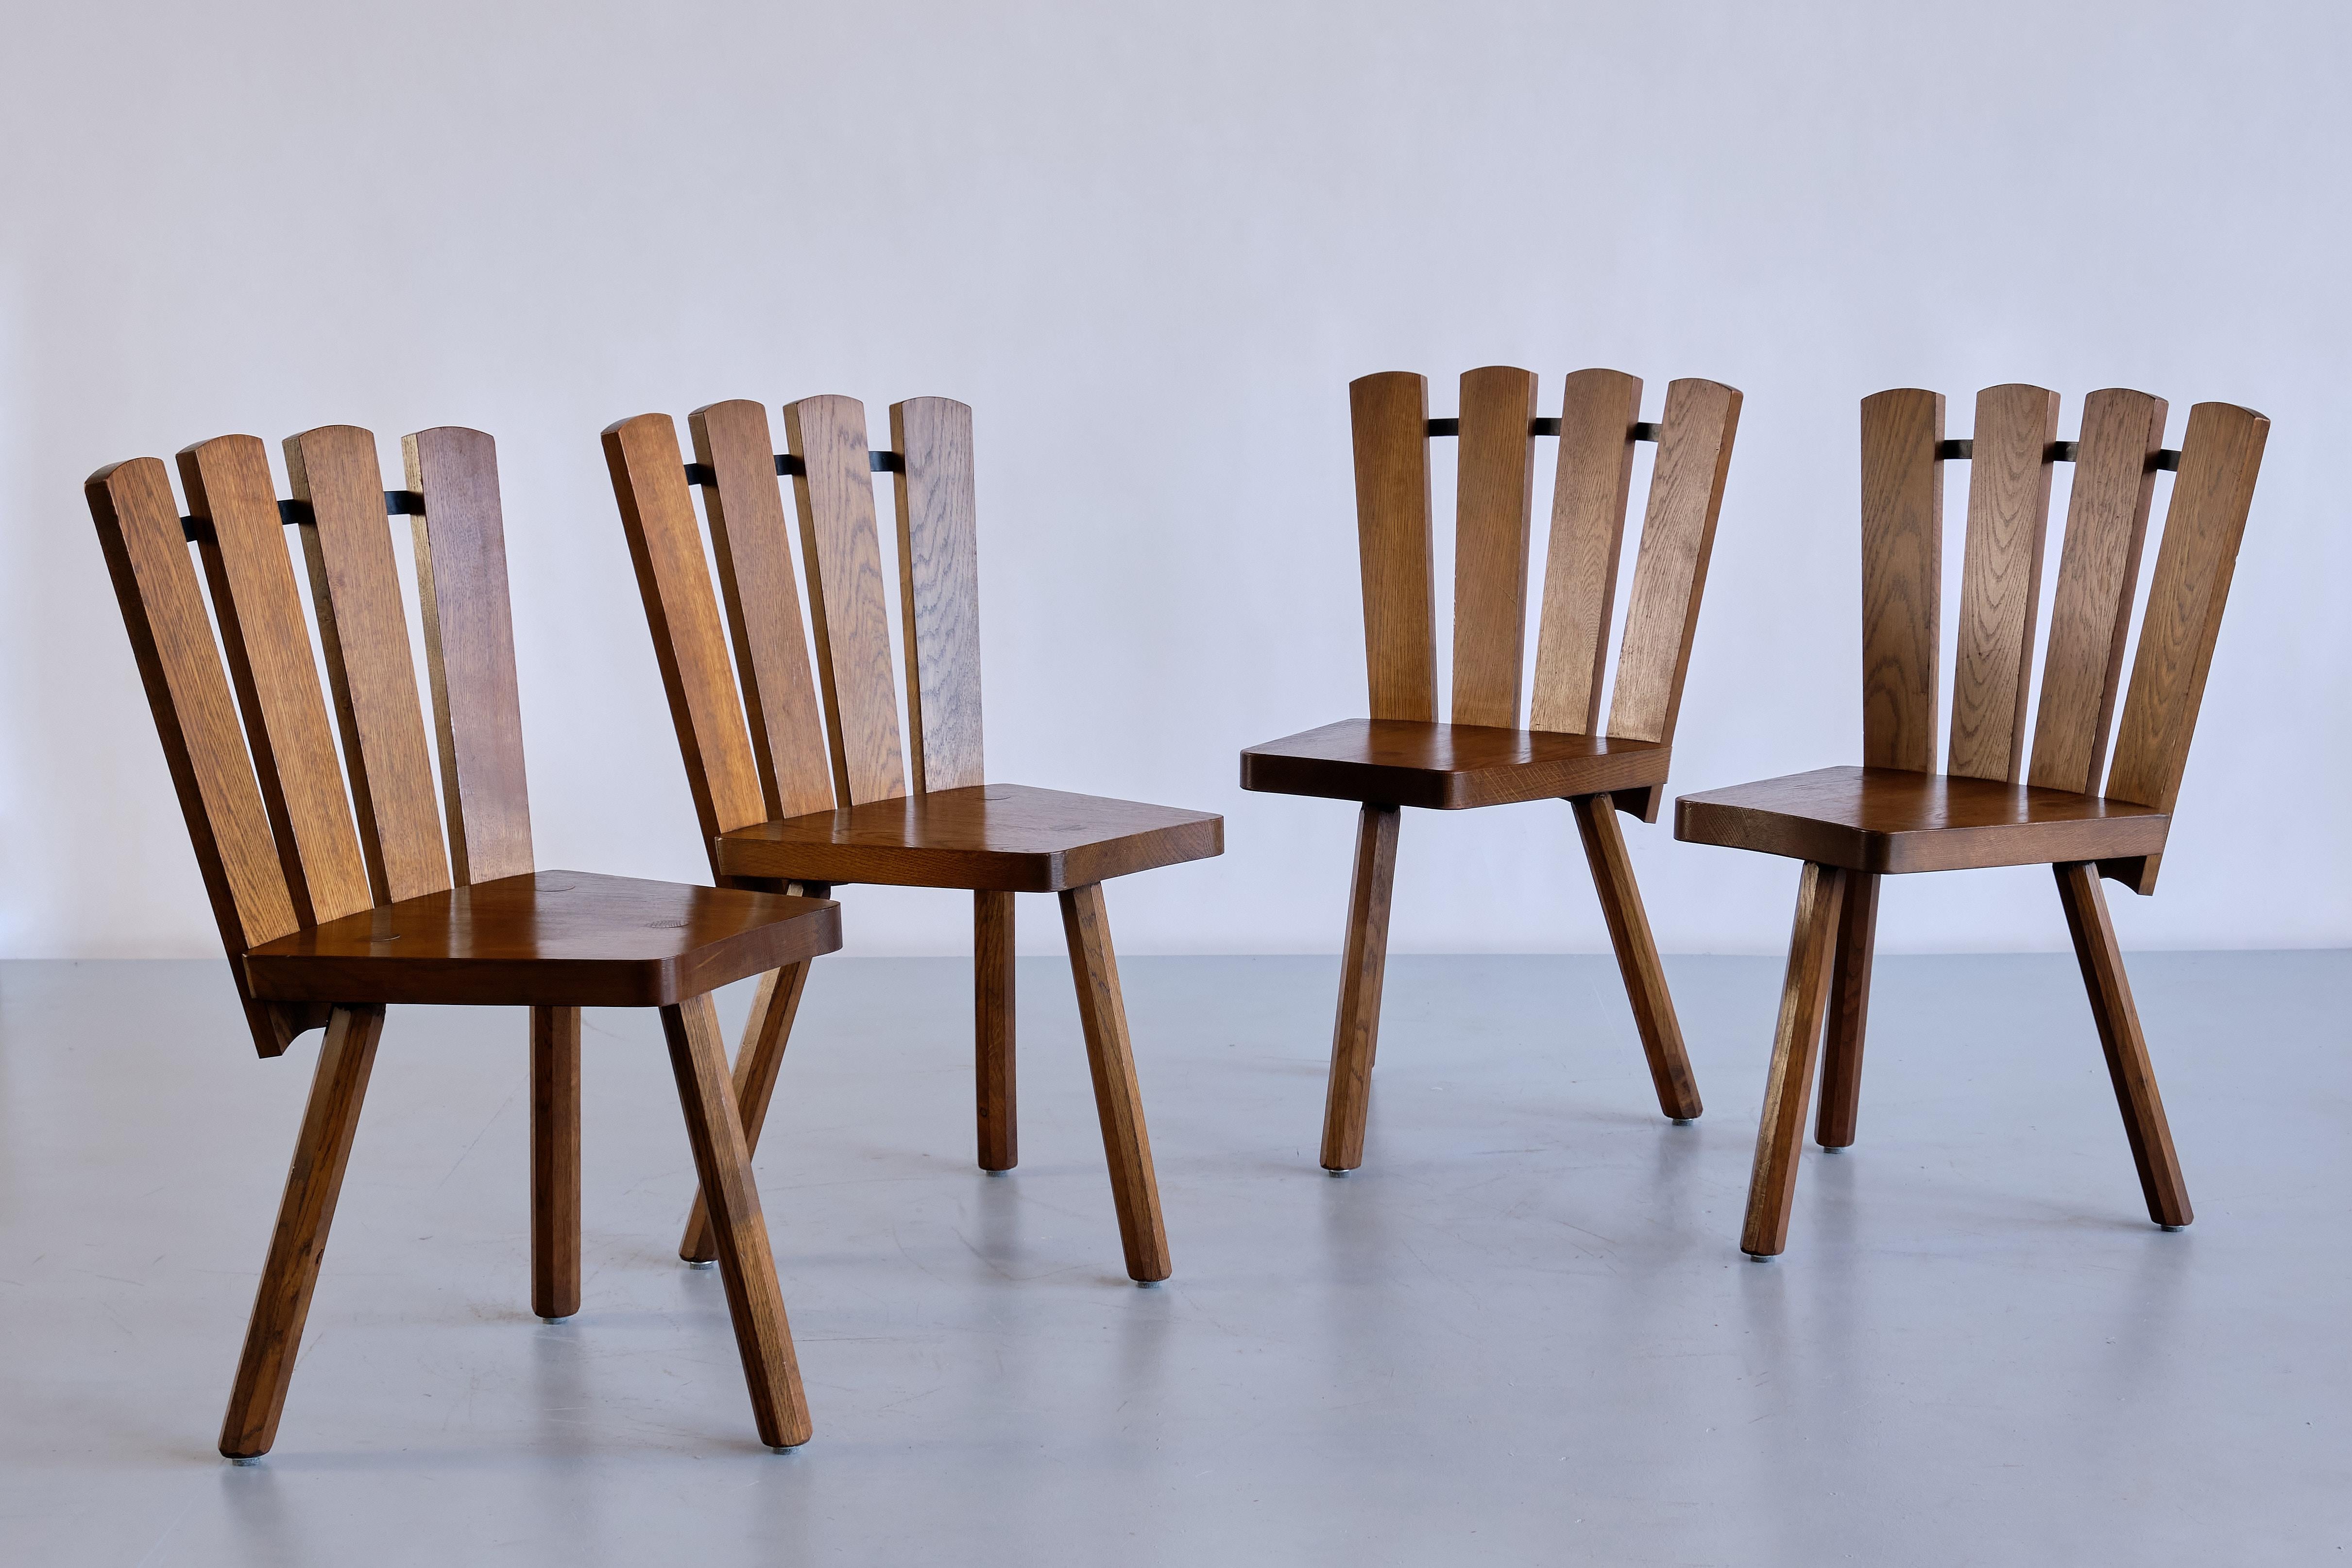 This striking set of four dining or side chairs was produced in France in the late 1950s. These sculptural chairs were handcrafted and are made of stained solid oak wood. The distinct design is marked by the fan shaped back, consisting of four slats